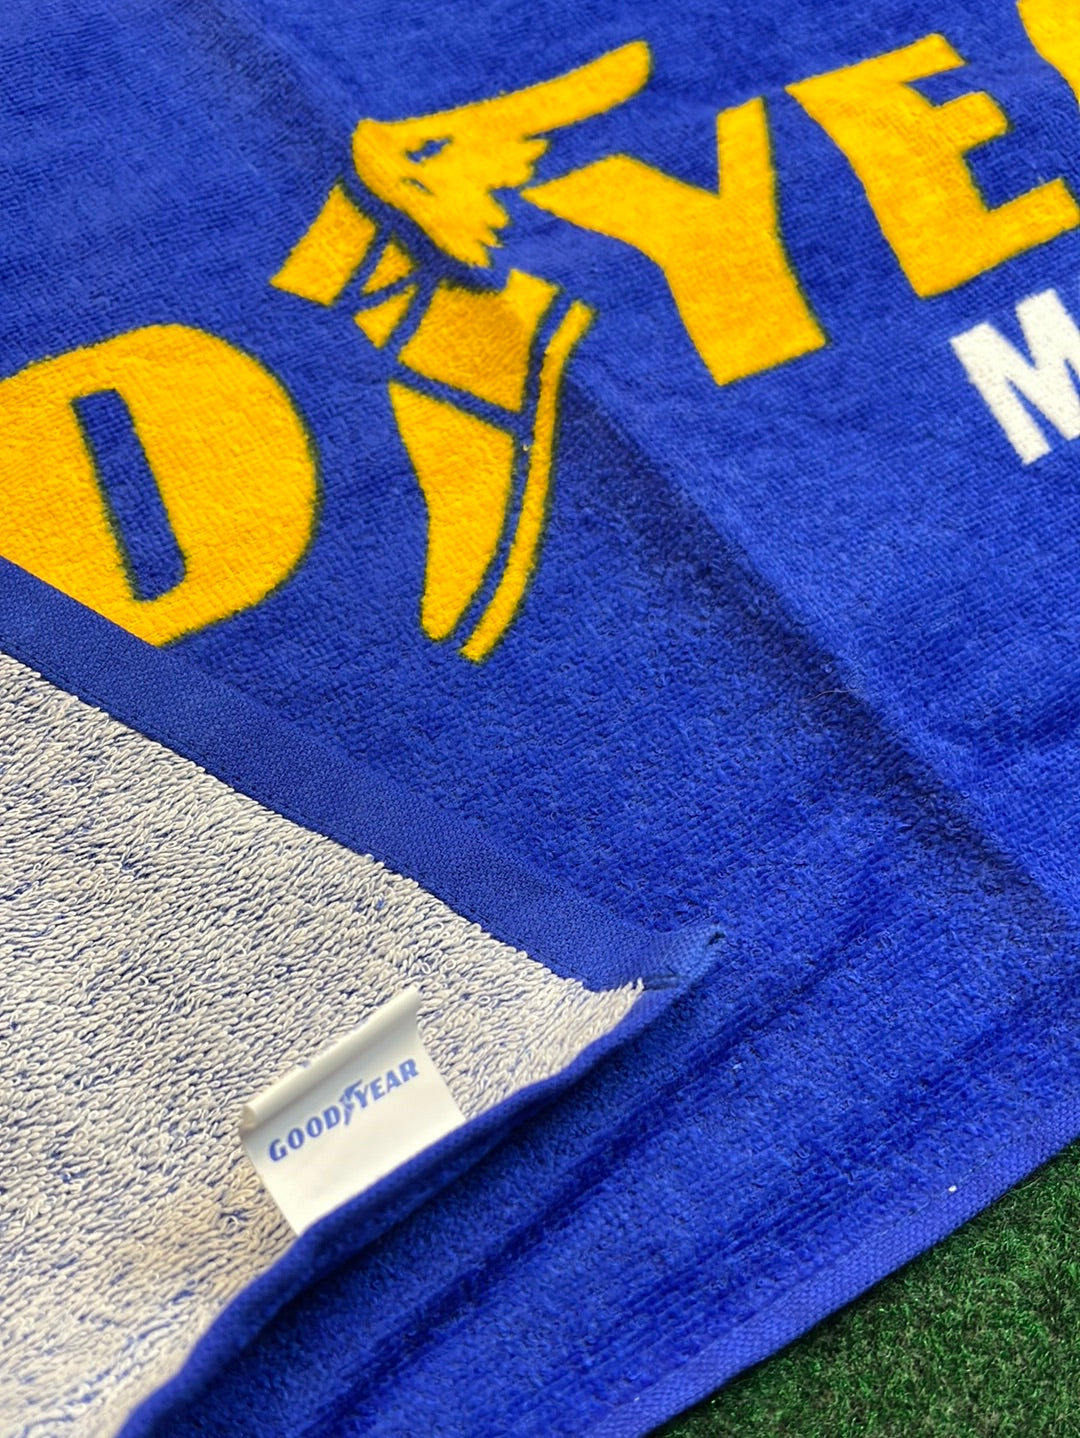 Goodyear - More Driven Towel